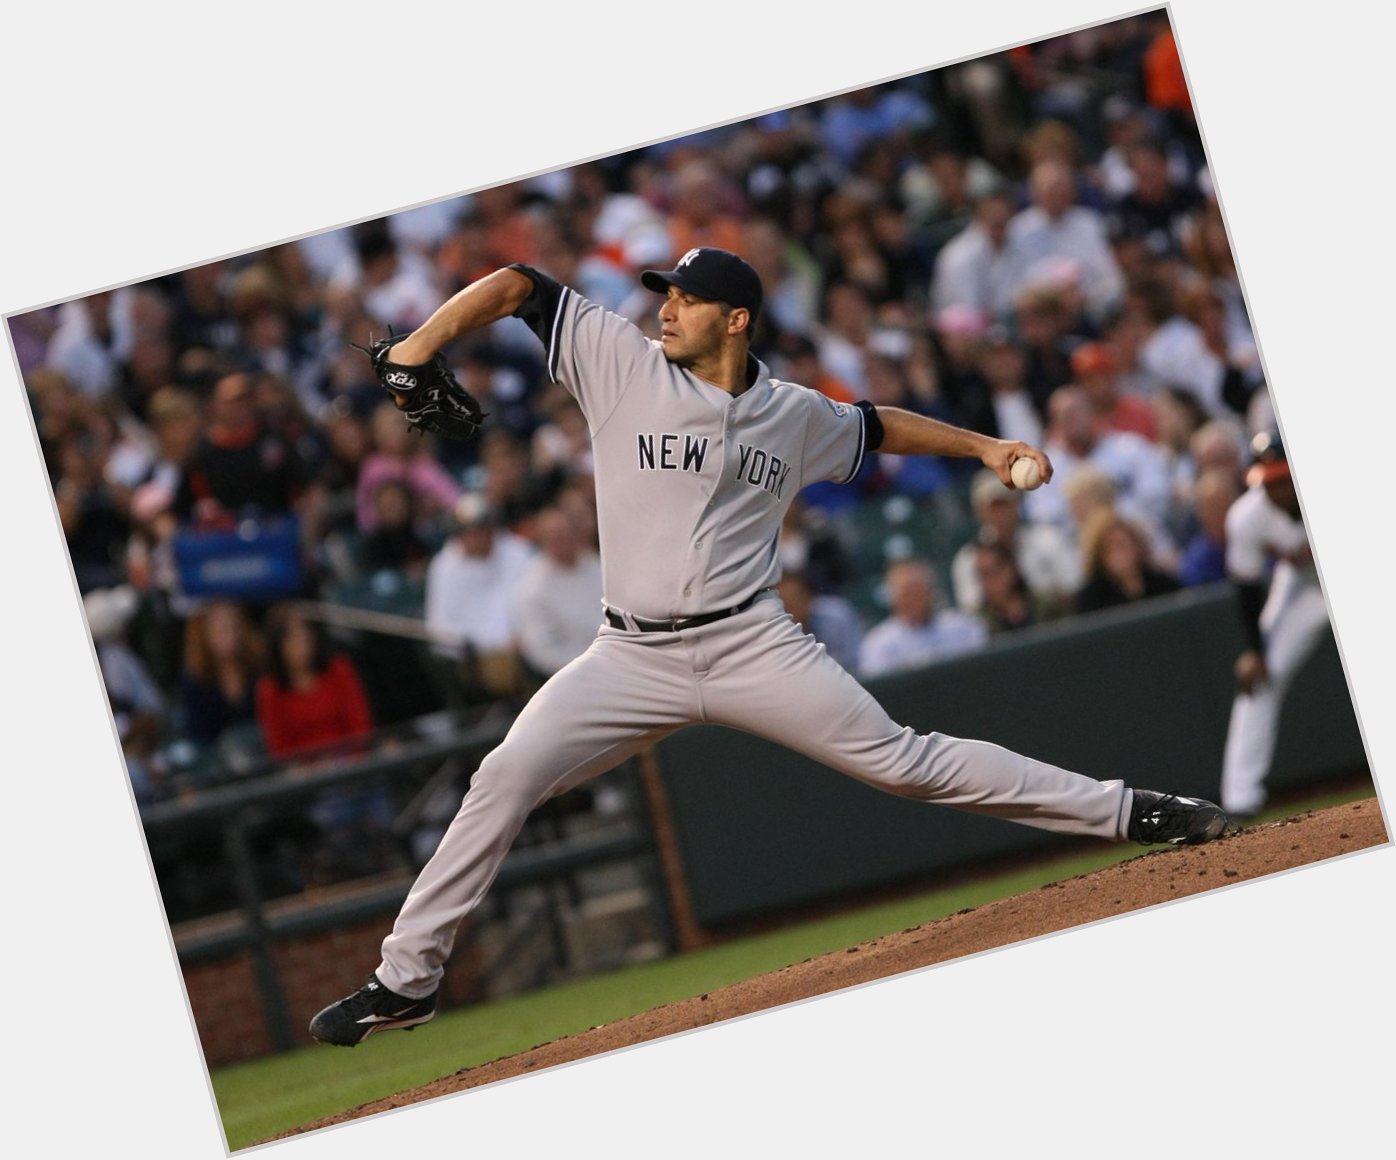 Happy Birthday to Andy Pettitte, who turns 43 today! 